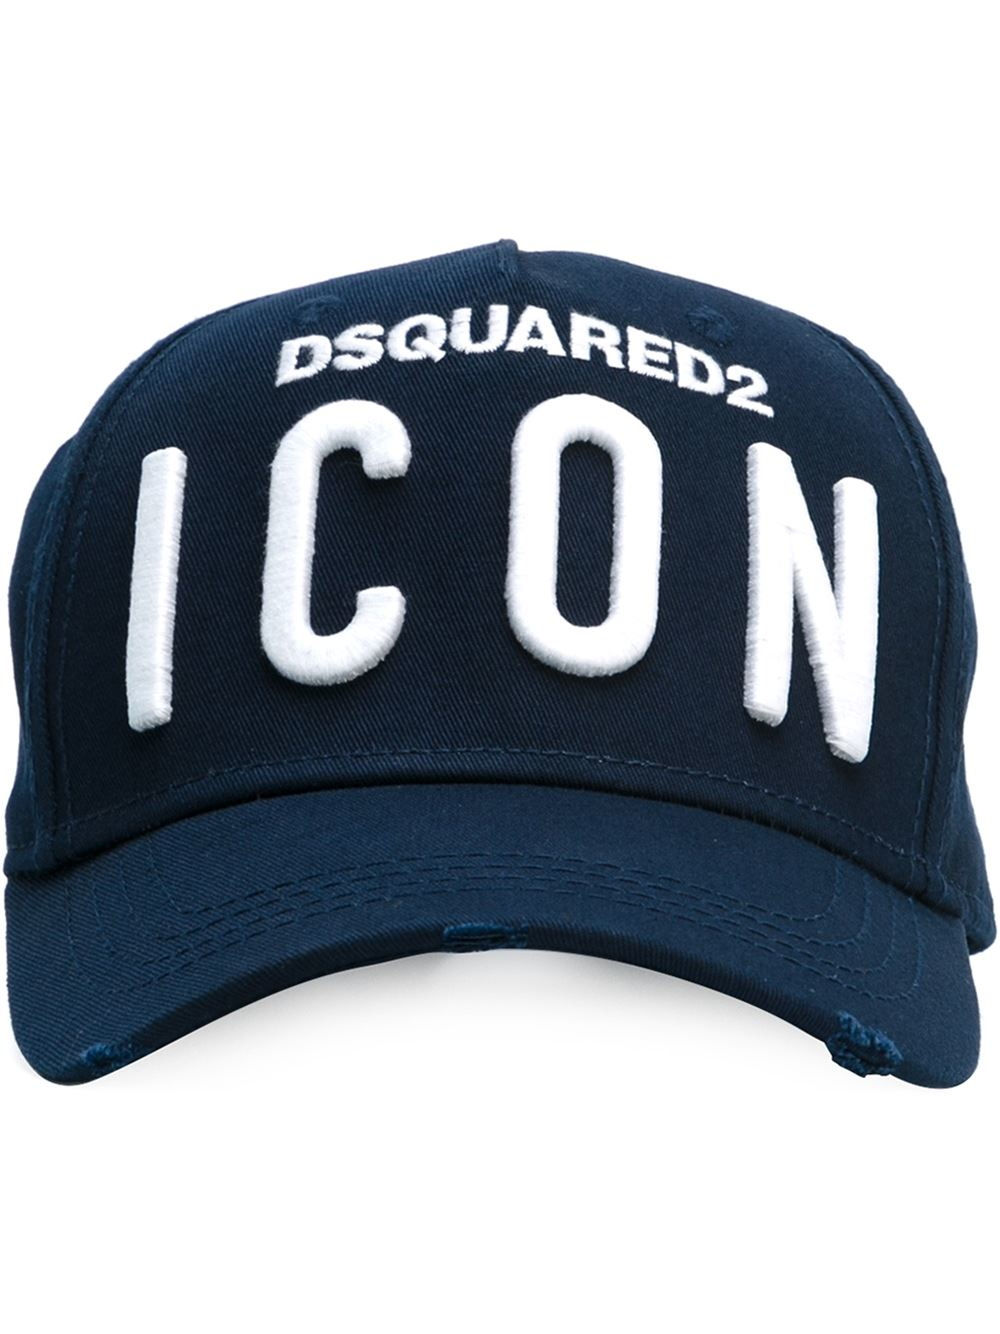 dsquared2 blue logo icon patch cap product 1 006581462 normal